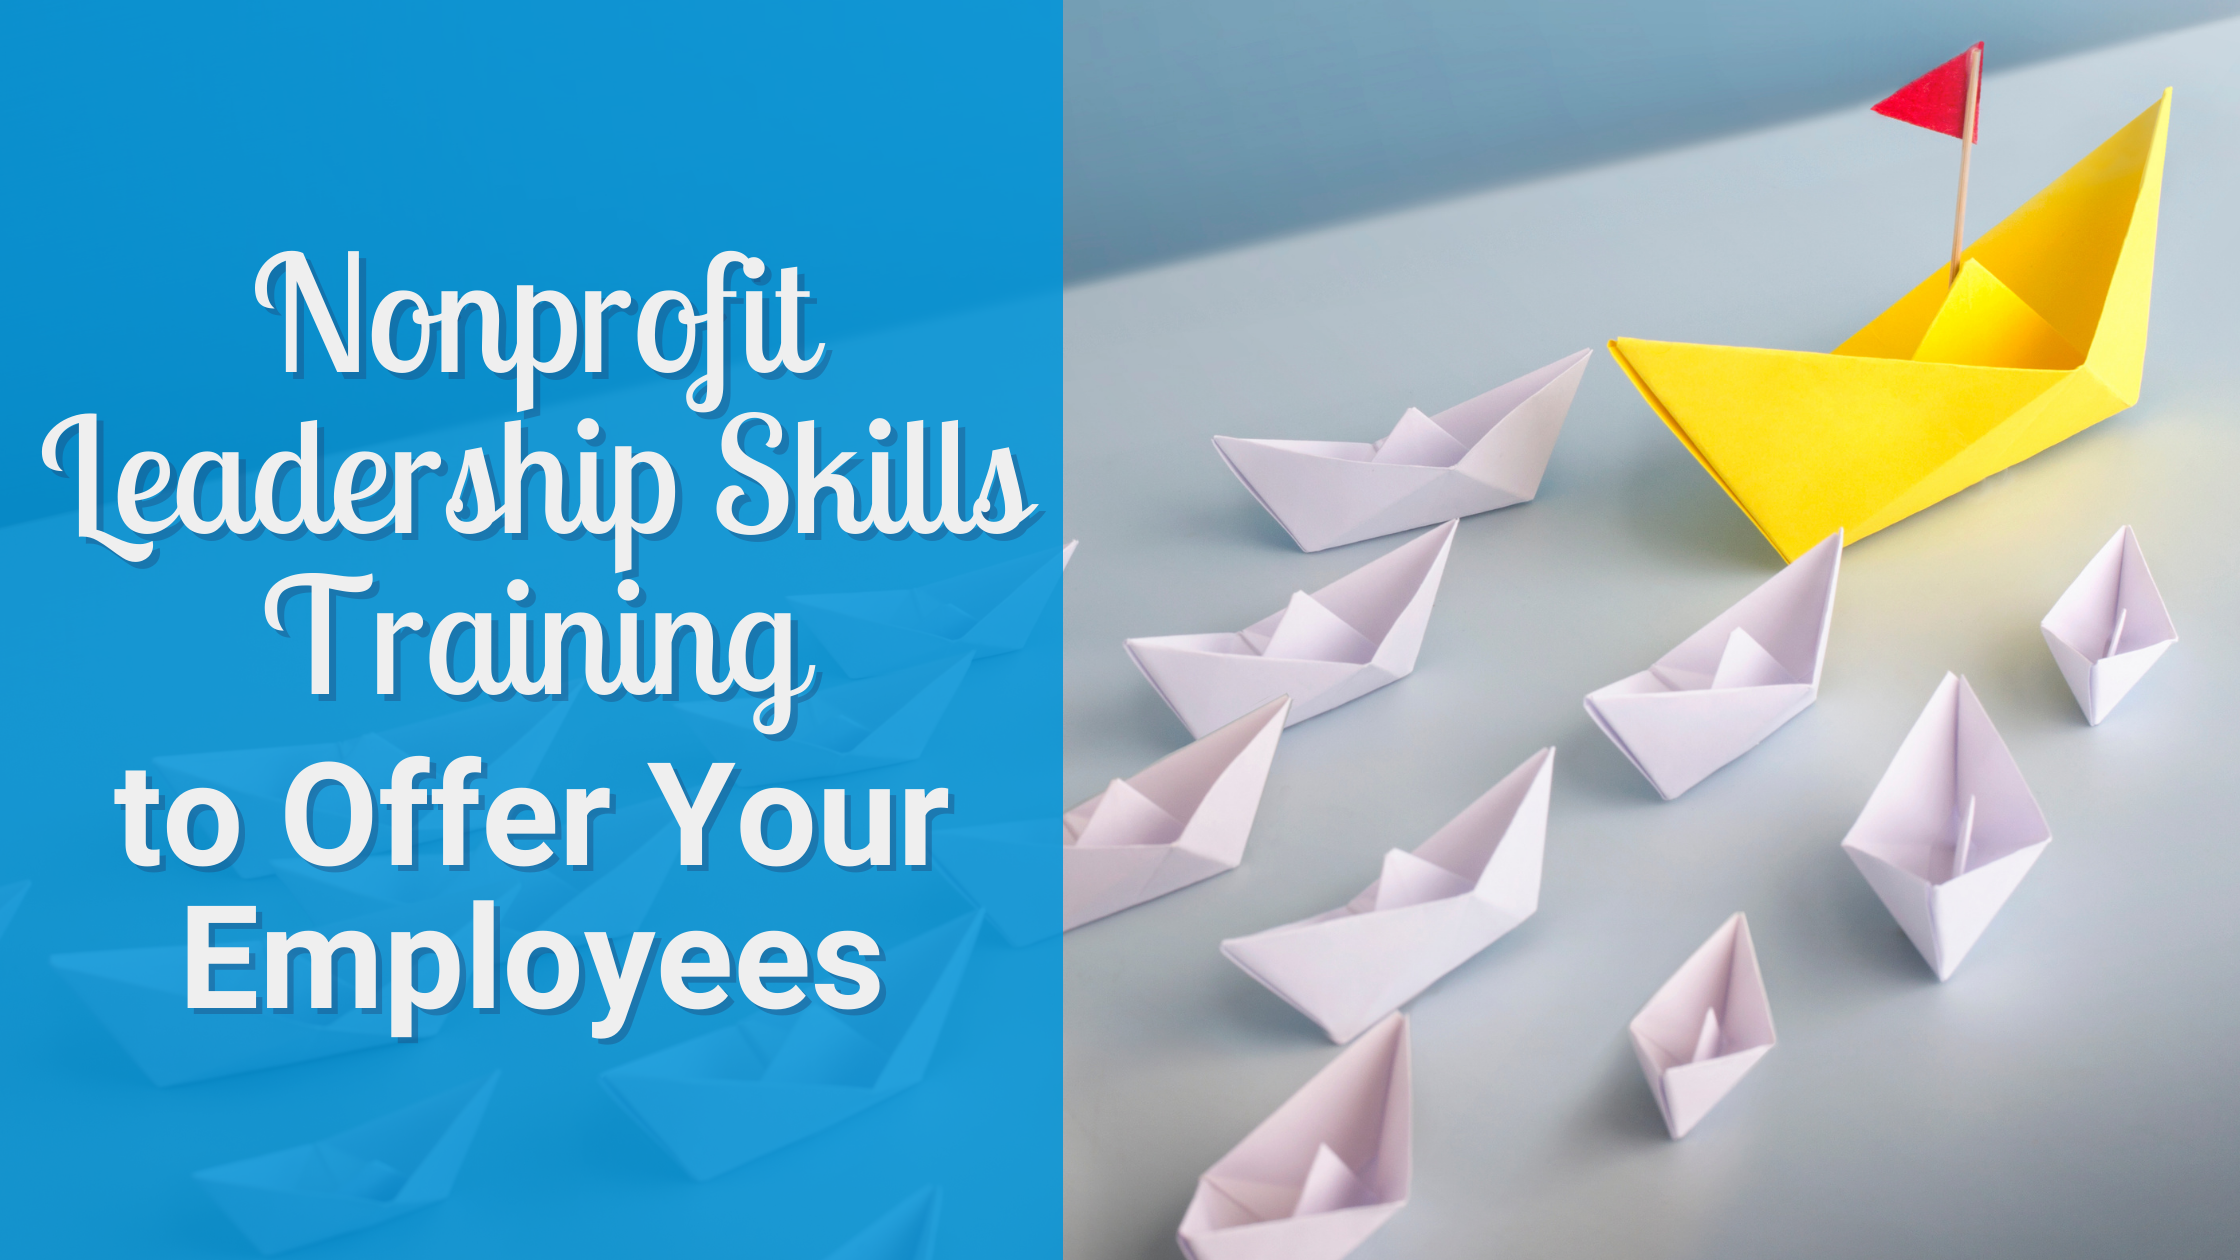 e-book: Nonprofit Leadership Skills Training to Offer Your Employees